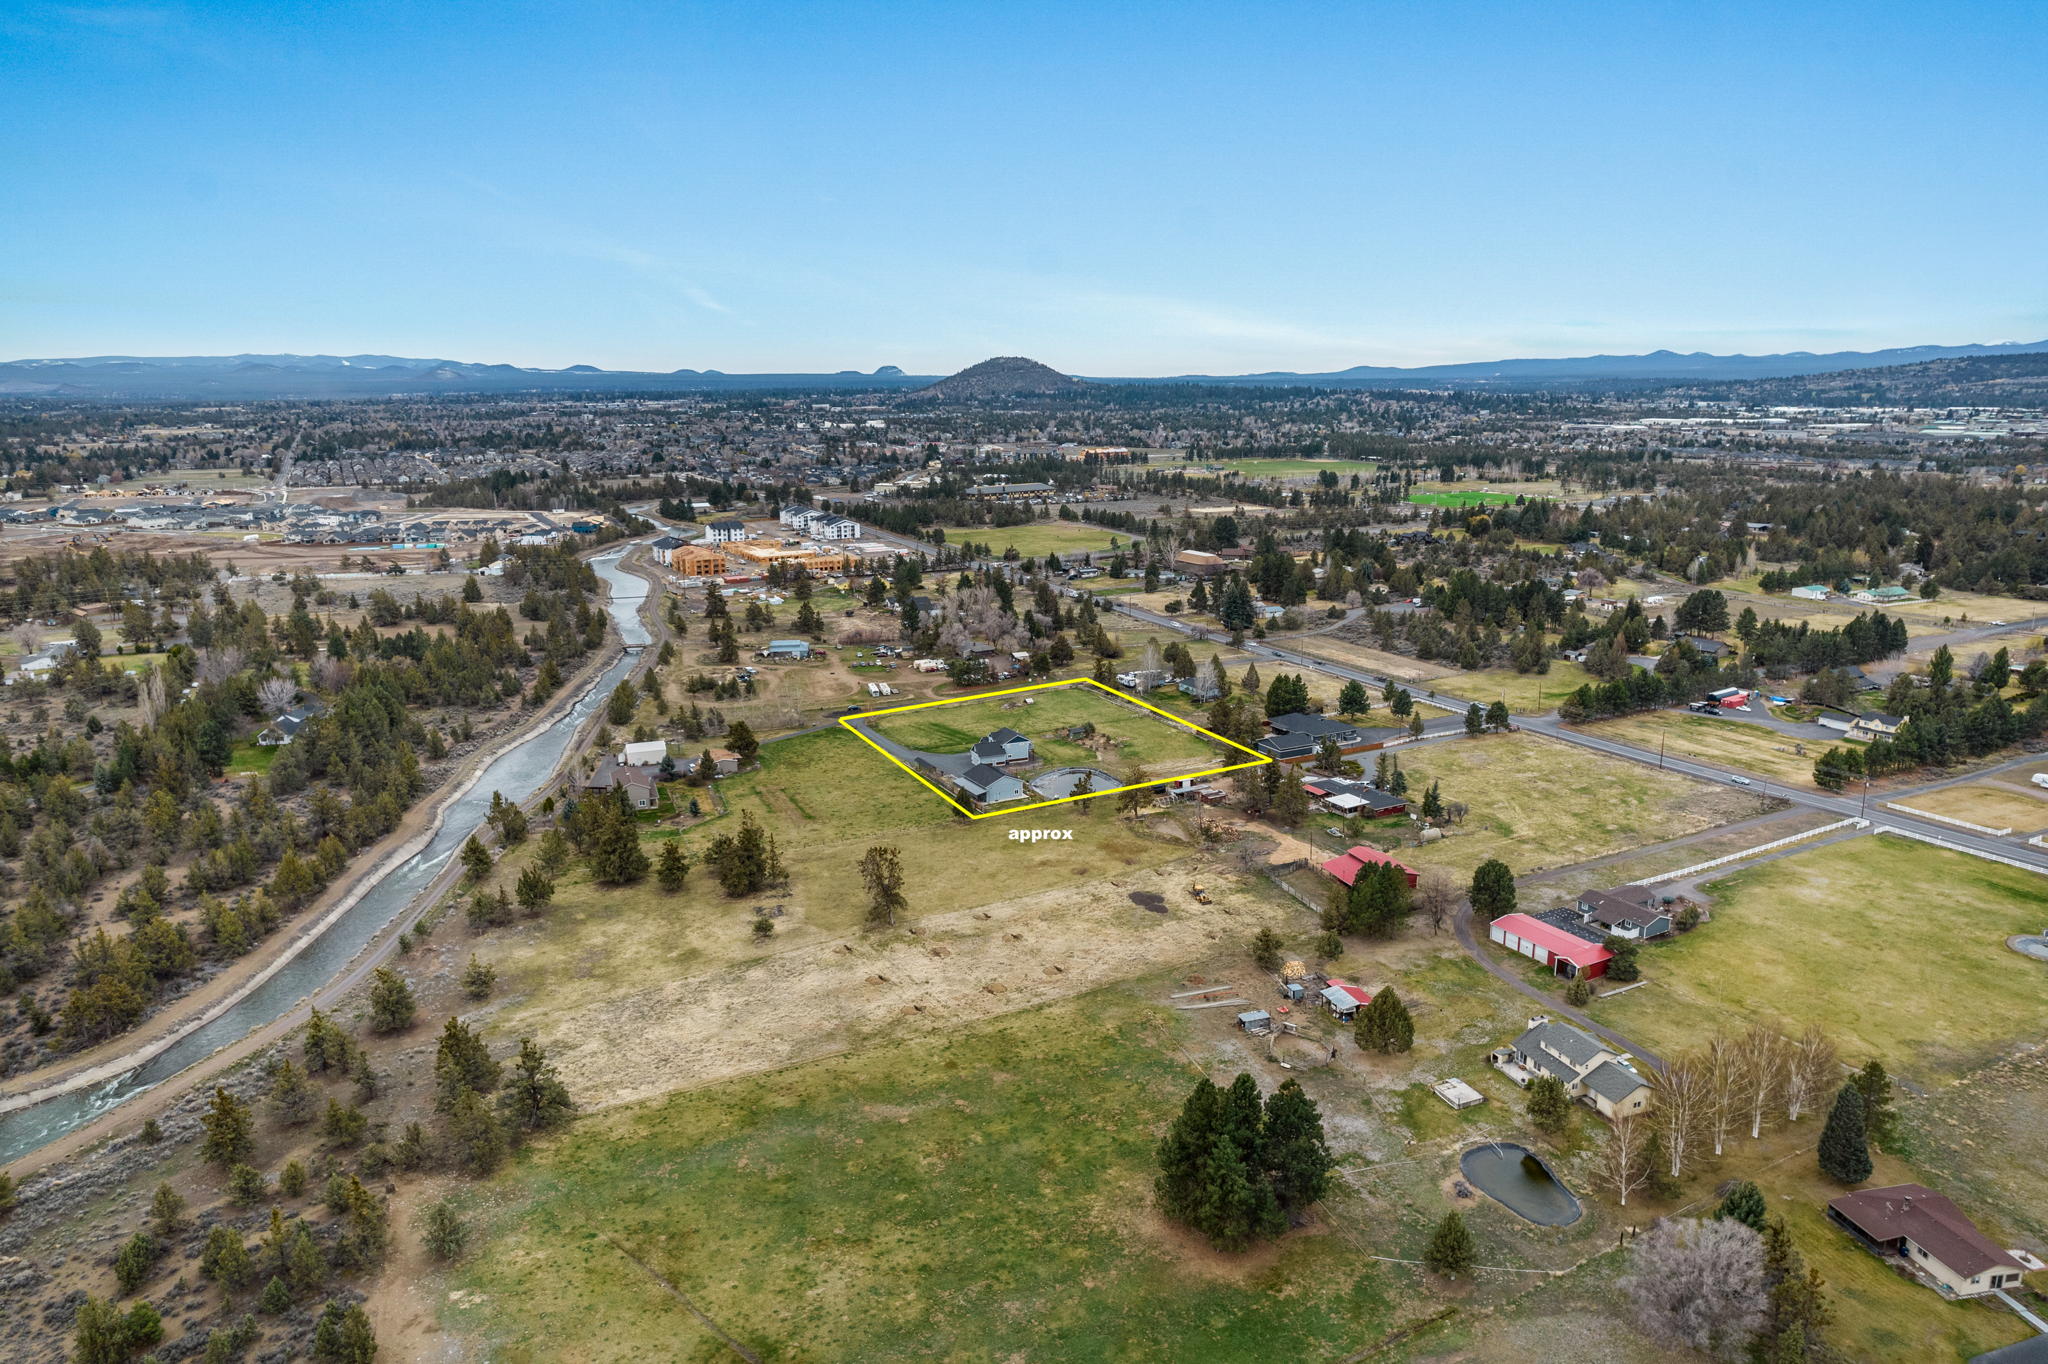 21640 Crofoot Ct, Bend, OR 97701, USA Photo 23